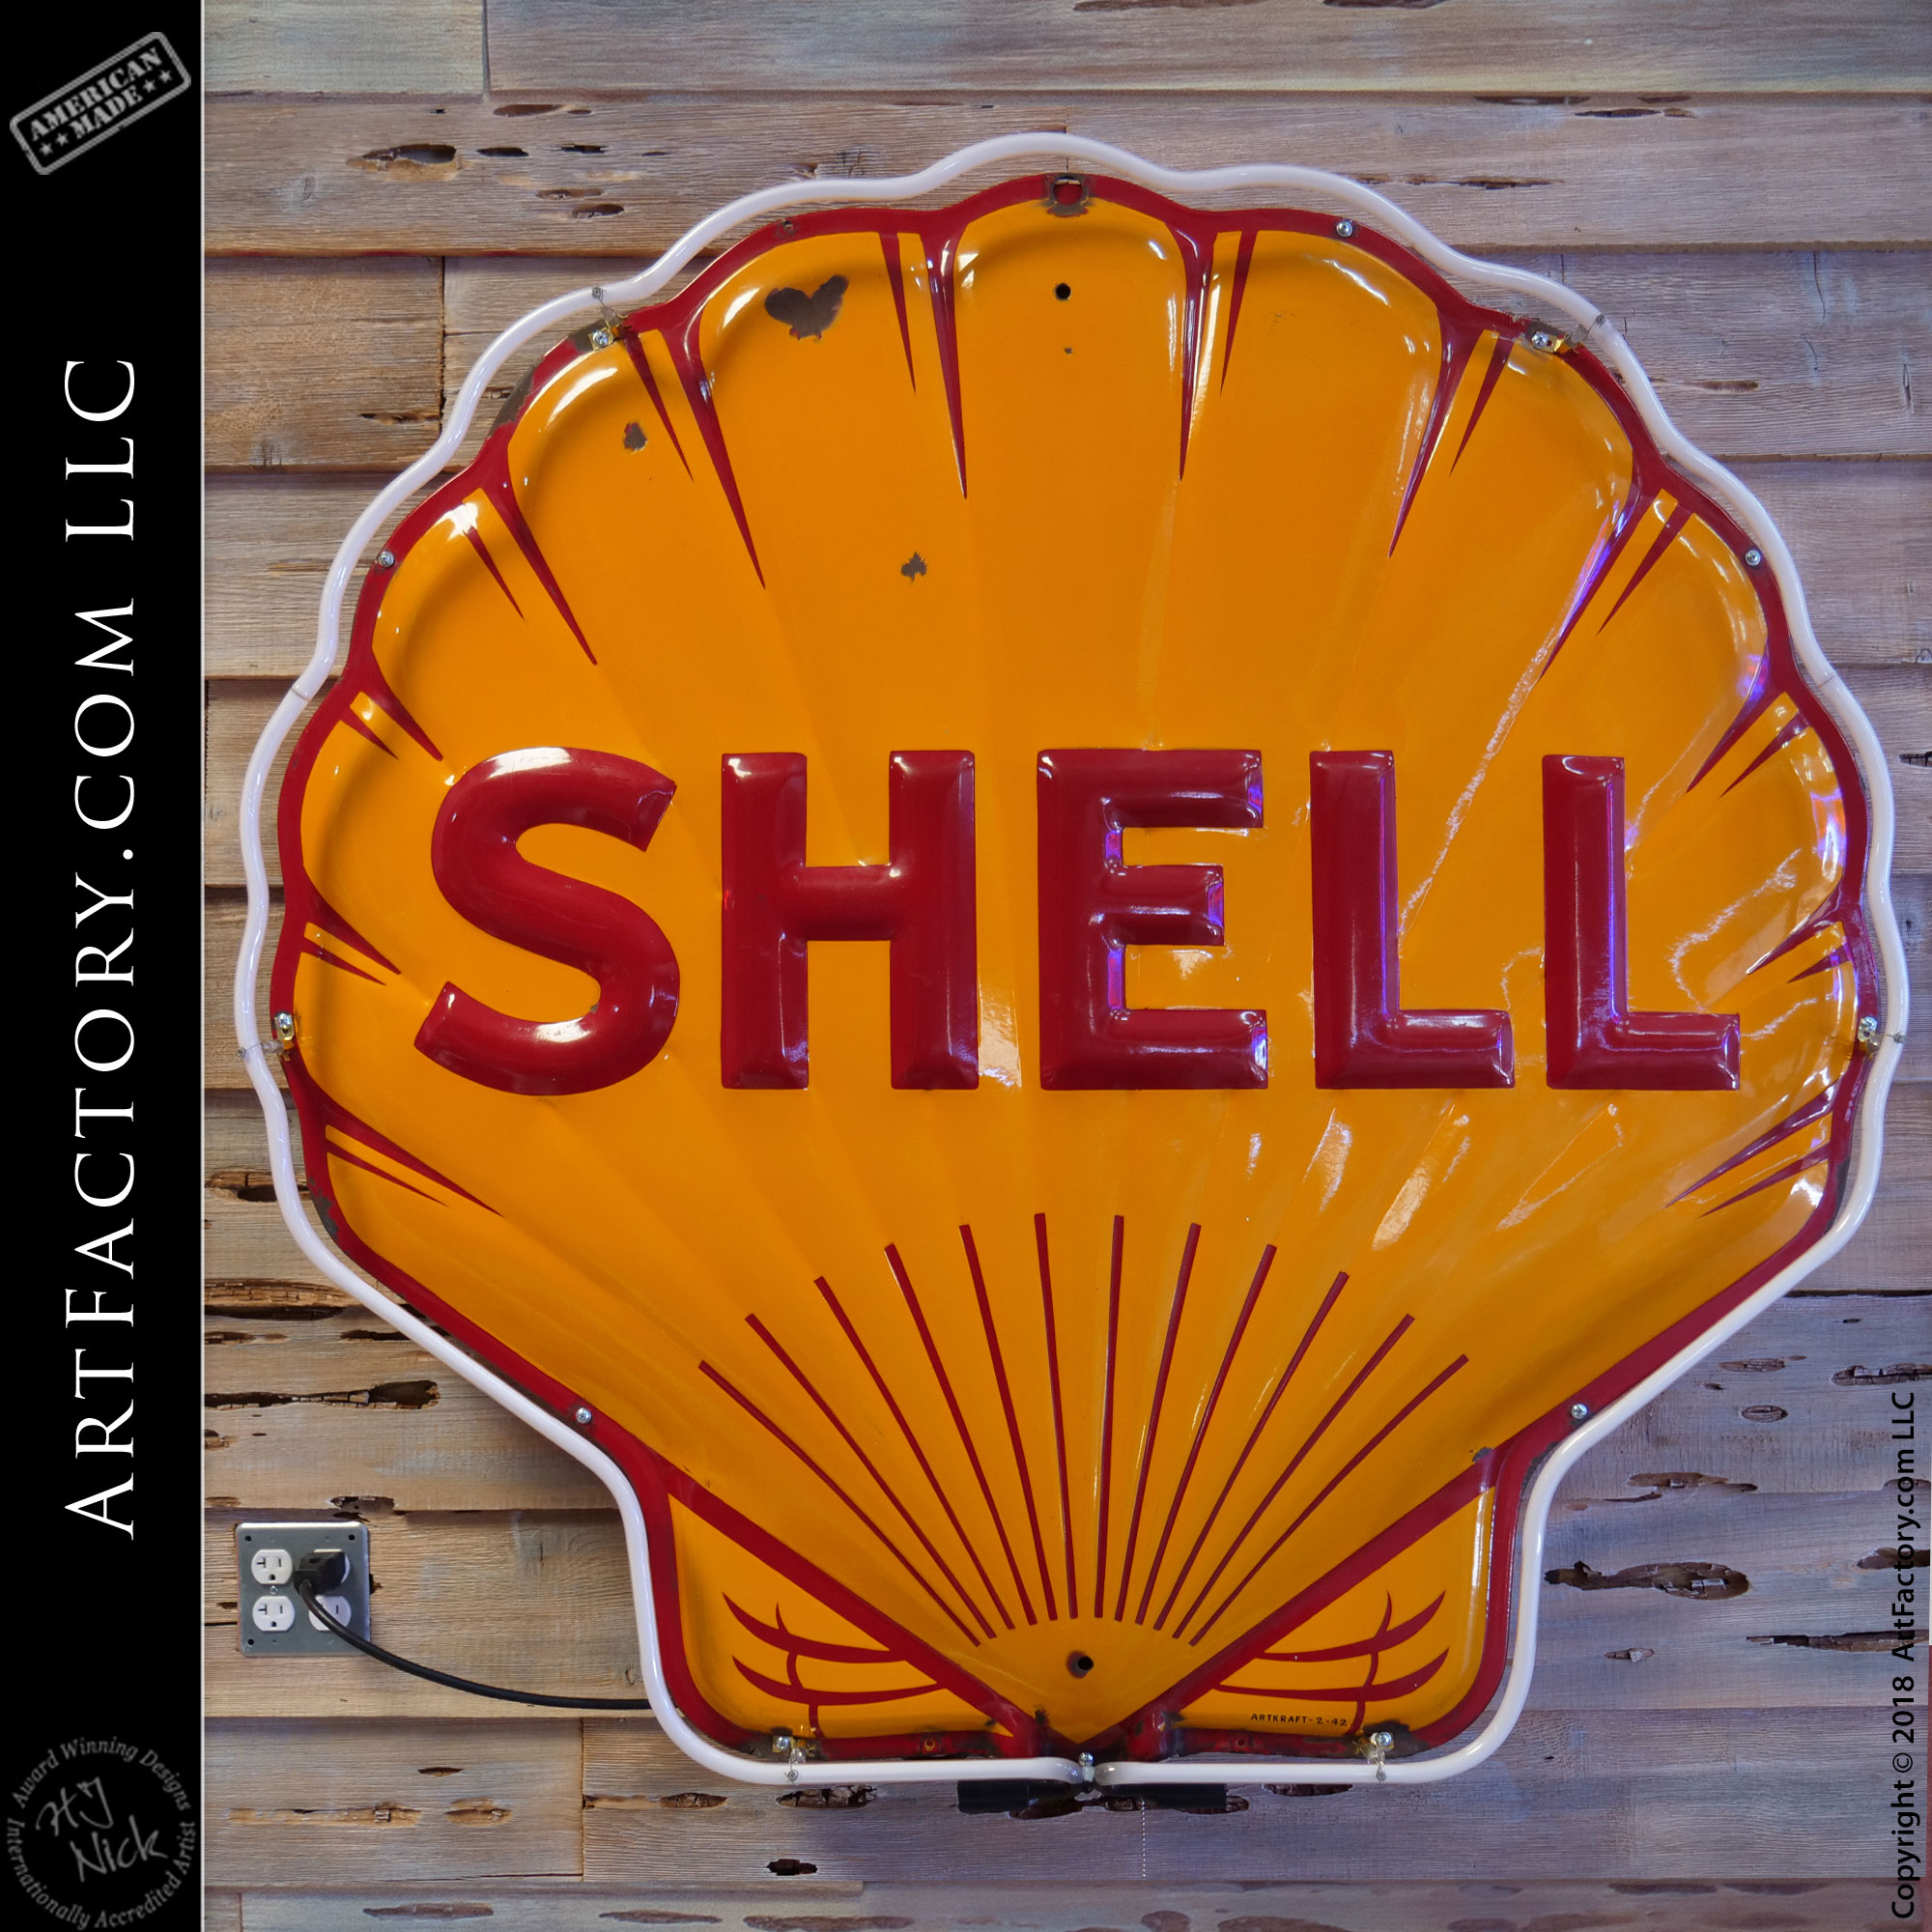 New Neon Yellow Vintage Shell Sign